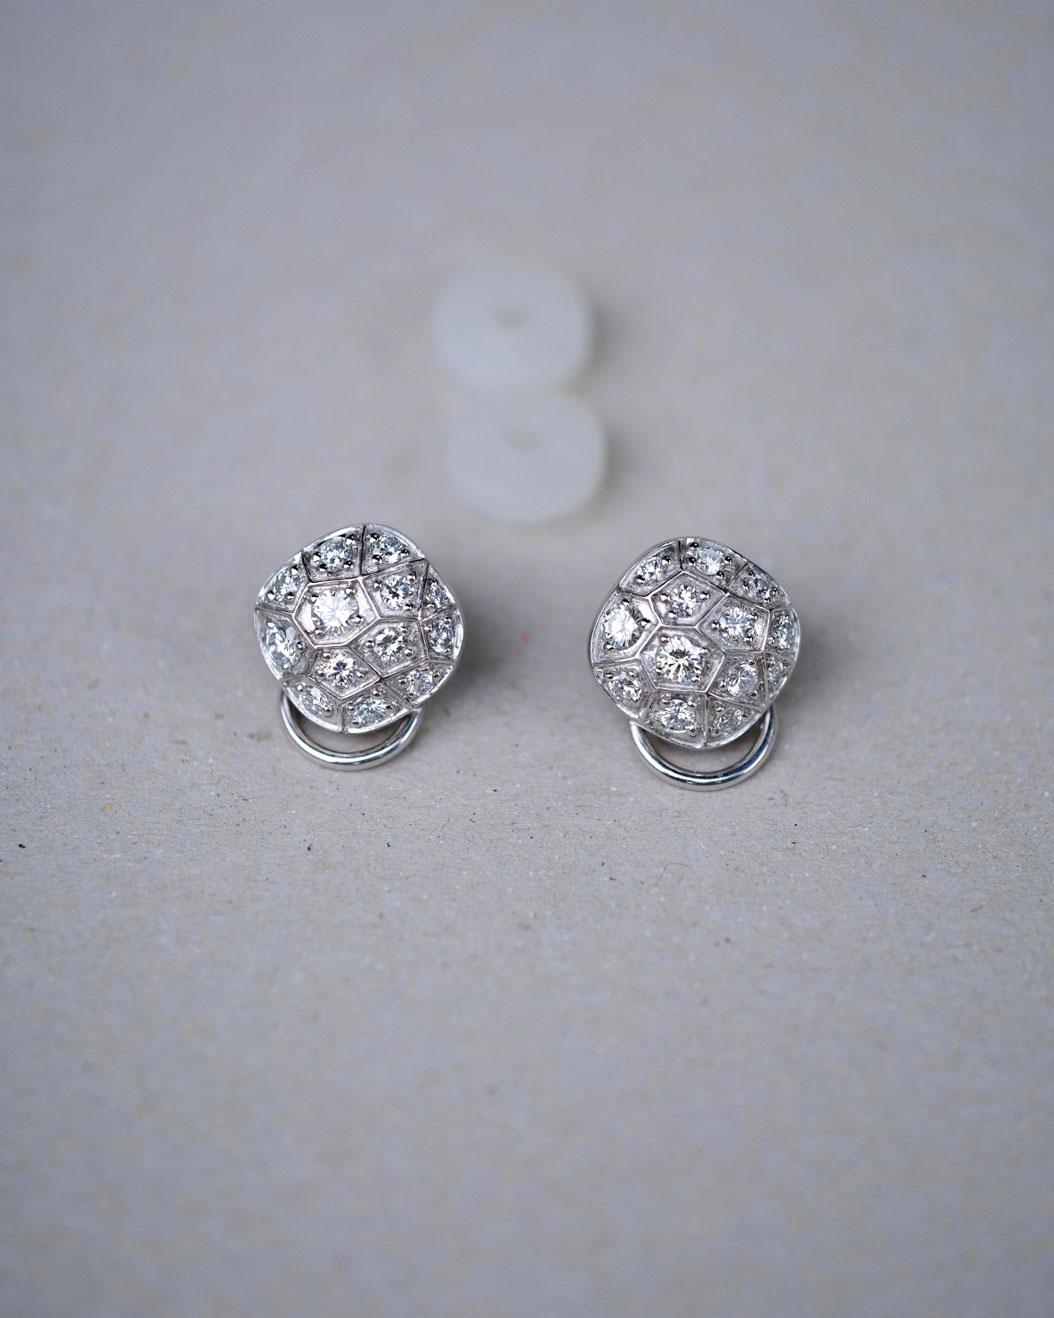 Earrings in White Gold with 26 Diamonds, 1, 56ct.. For Sale 1